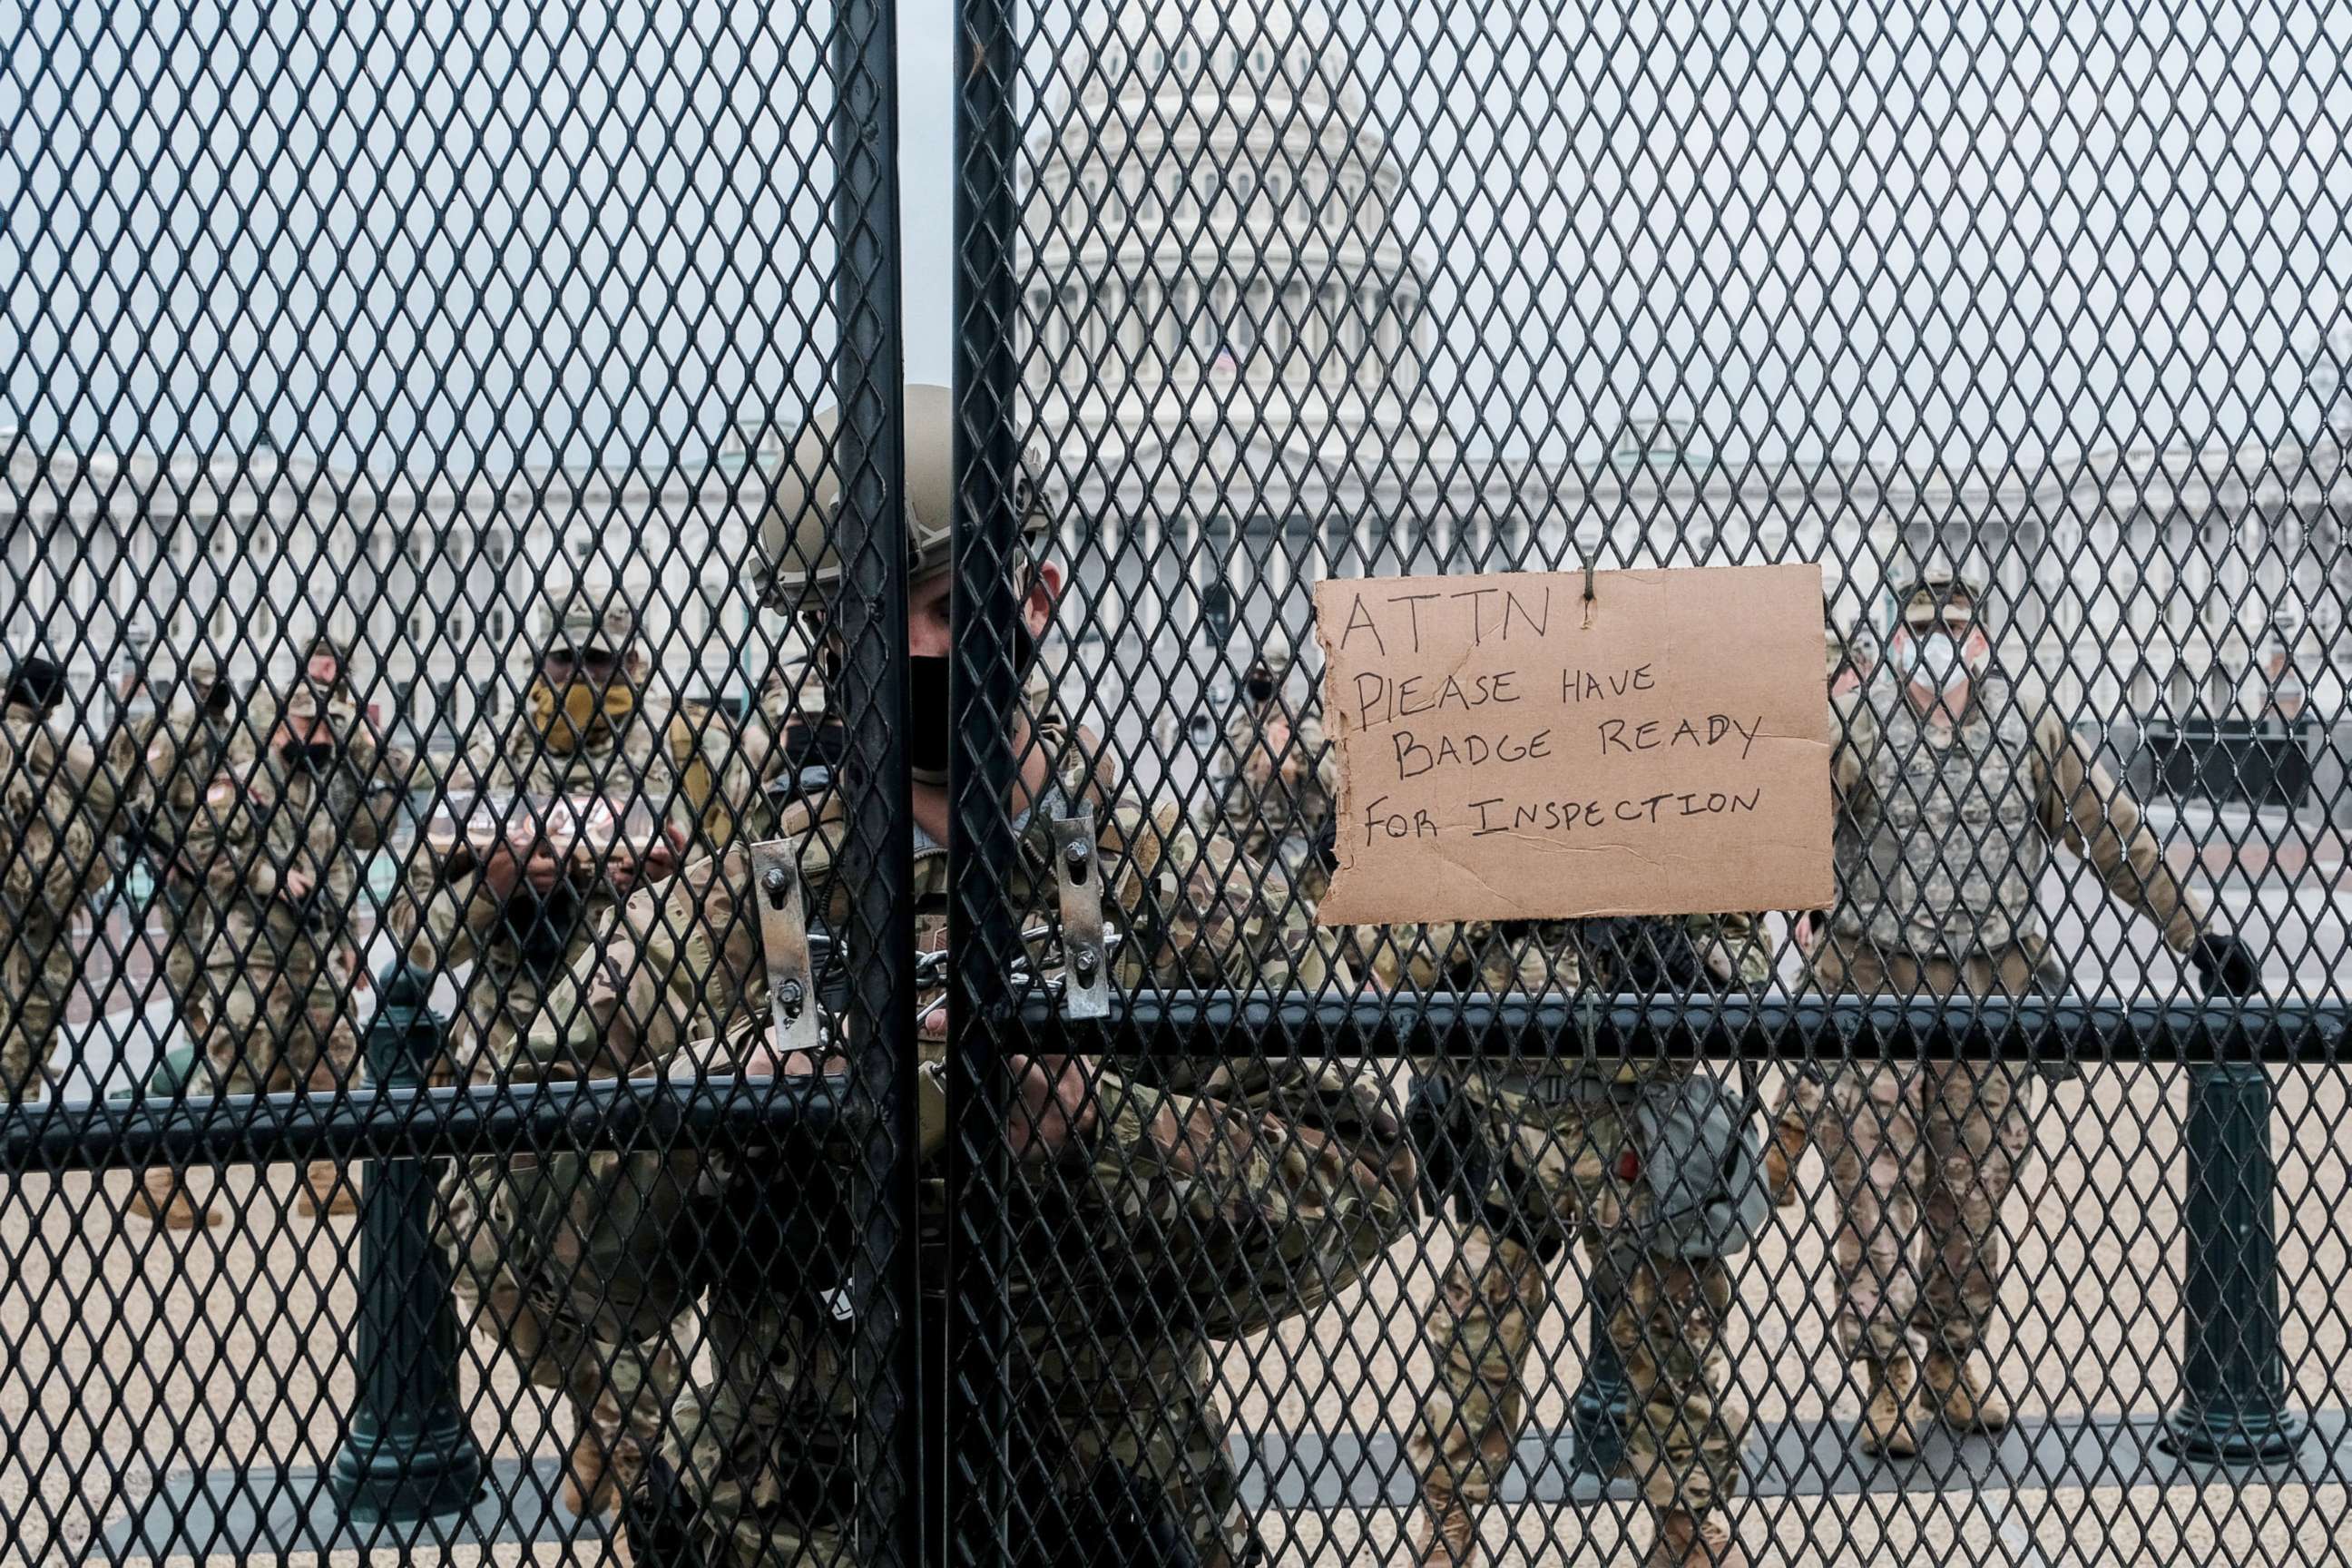 PHOTO: Member of the National Guard stand guard behind a security fence outside of the Capitol on Jan. 15, 2021.